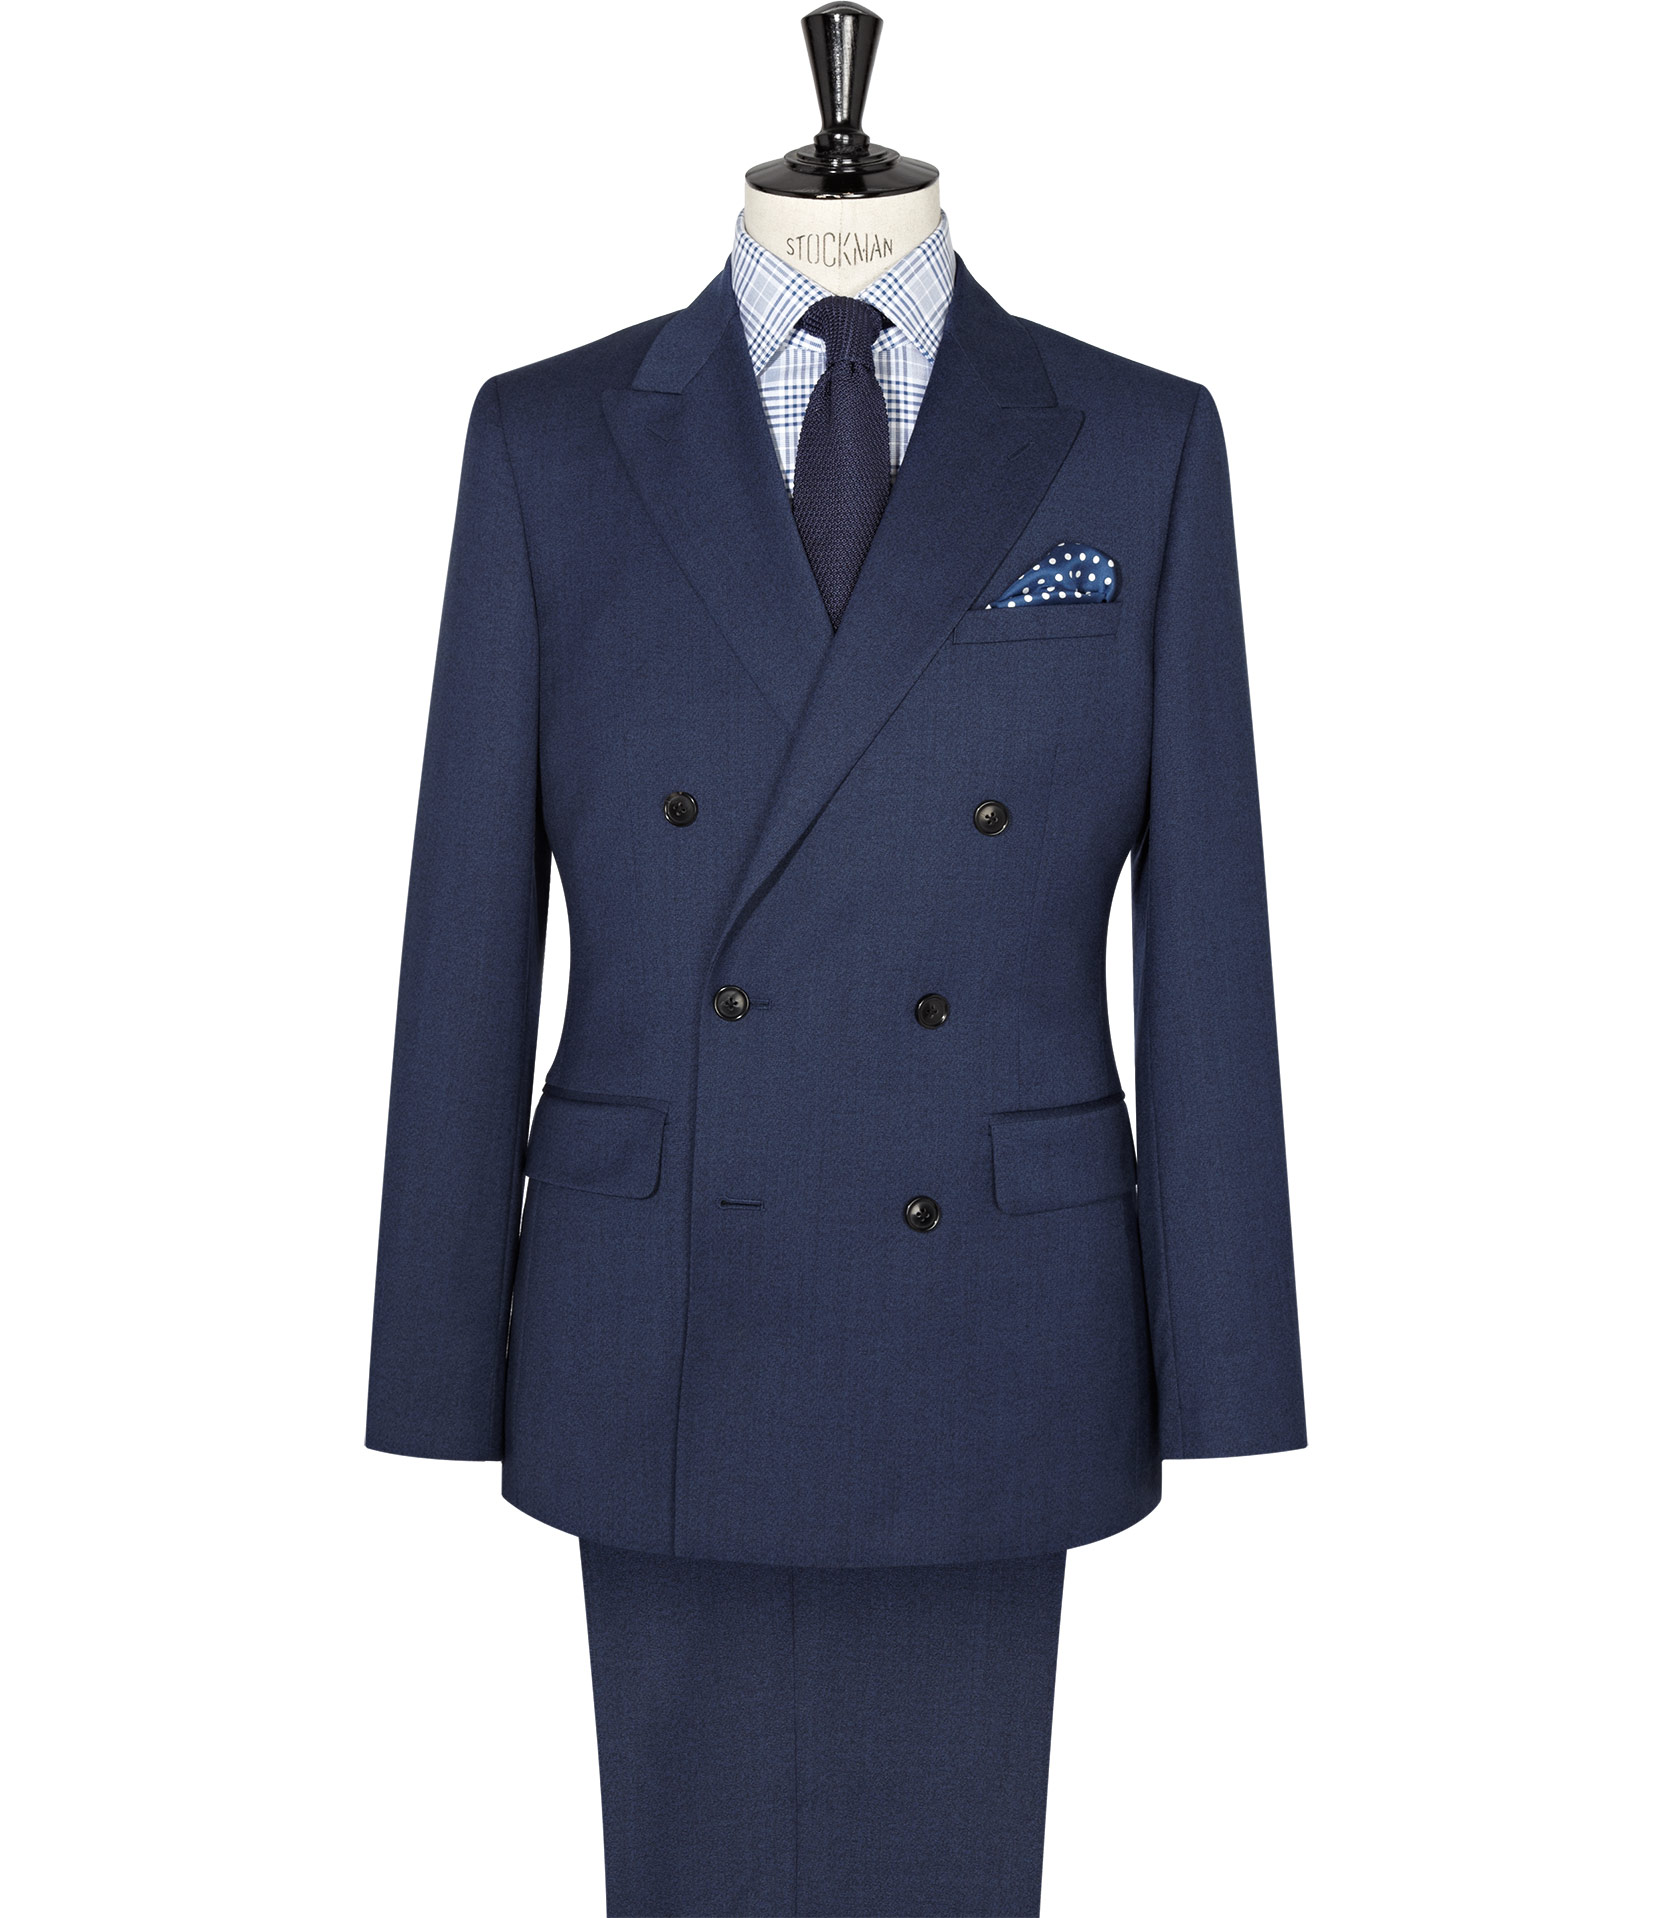 Reiss Scotsdale Double Breasted Suit in Blue for Men - Lyst